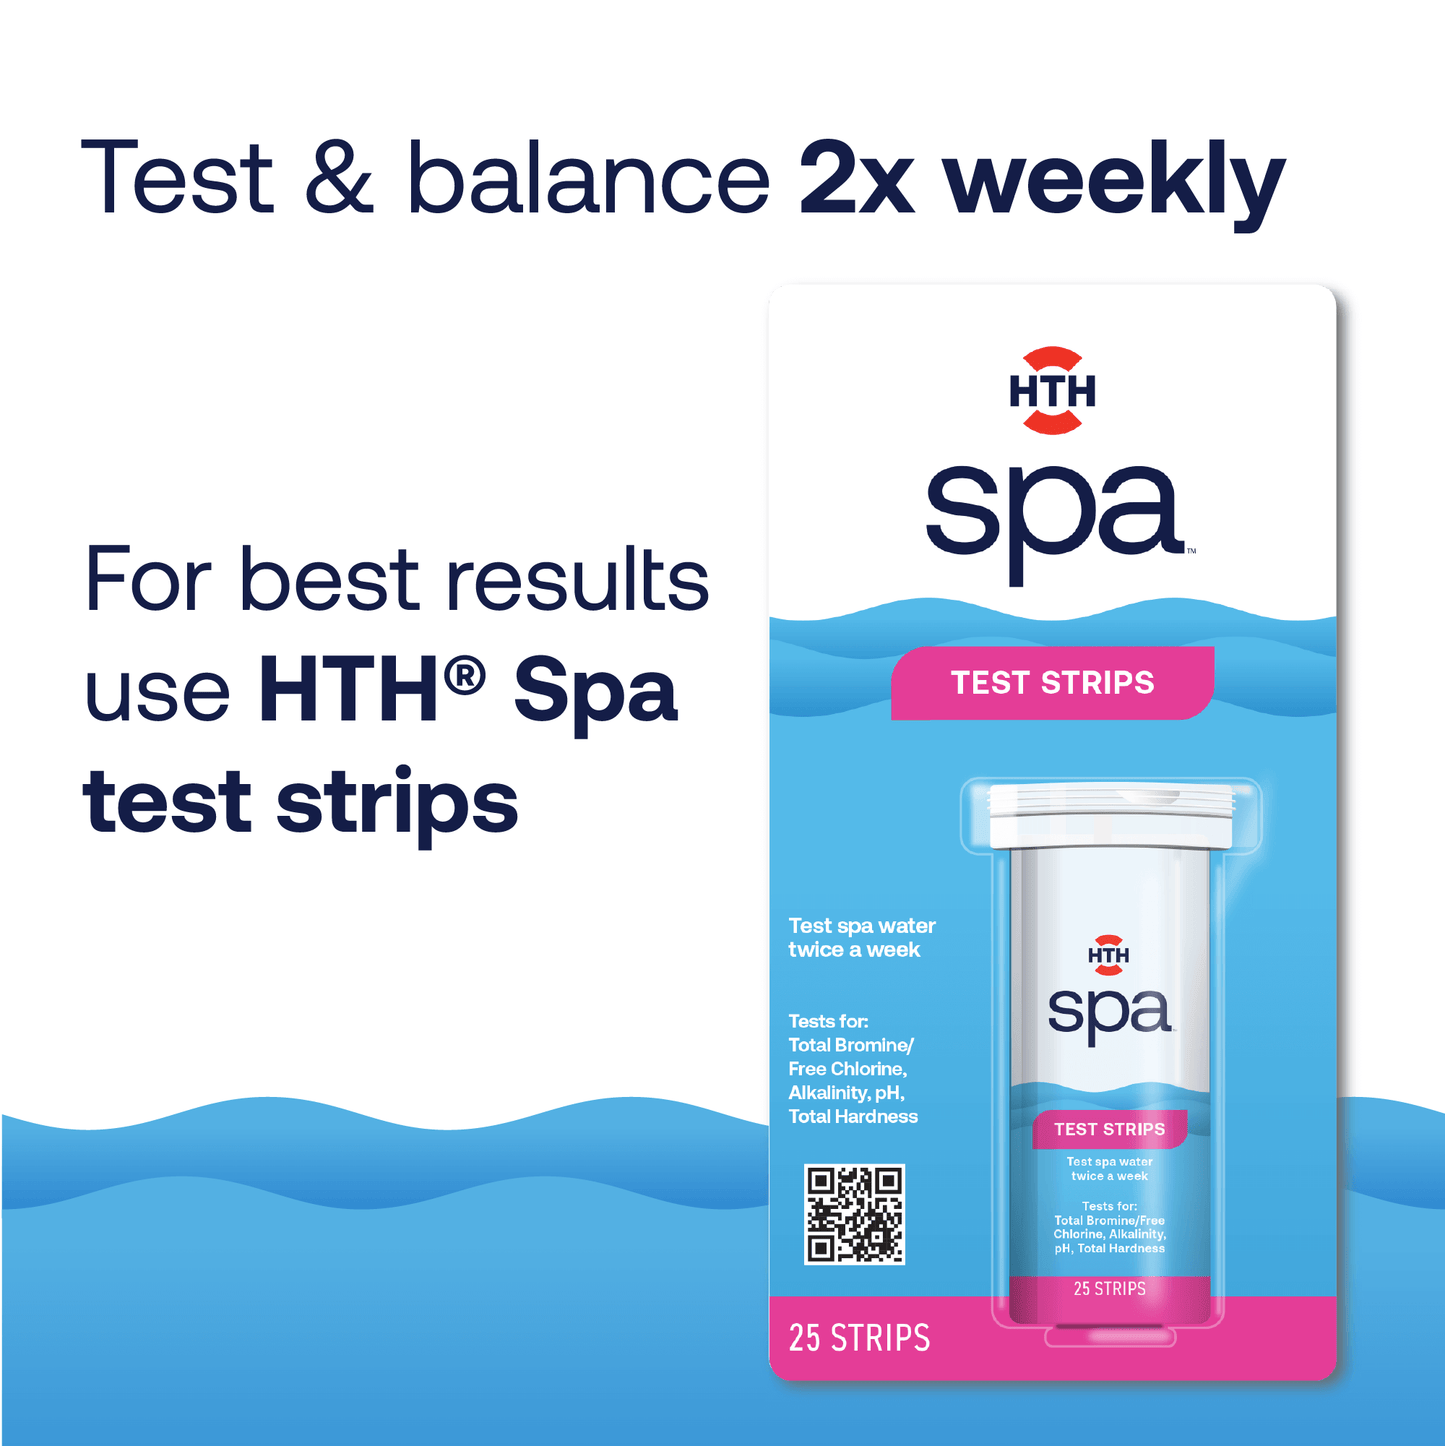 HTH spa™ Care Test Strips